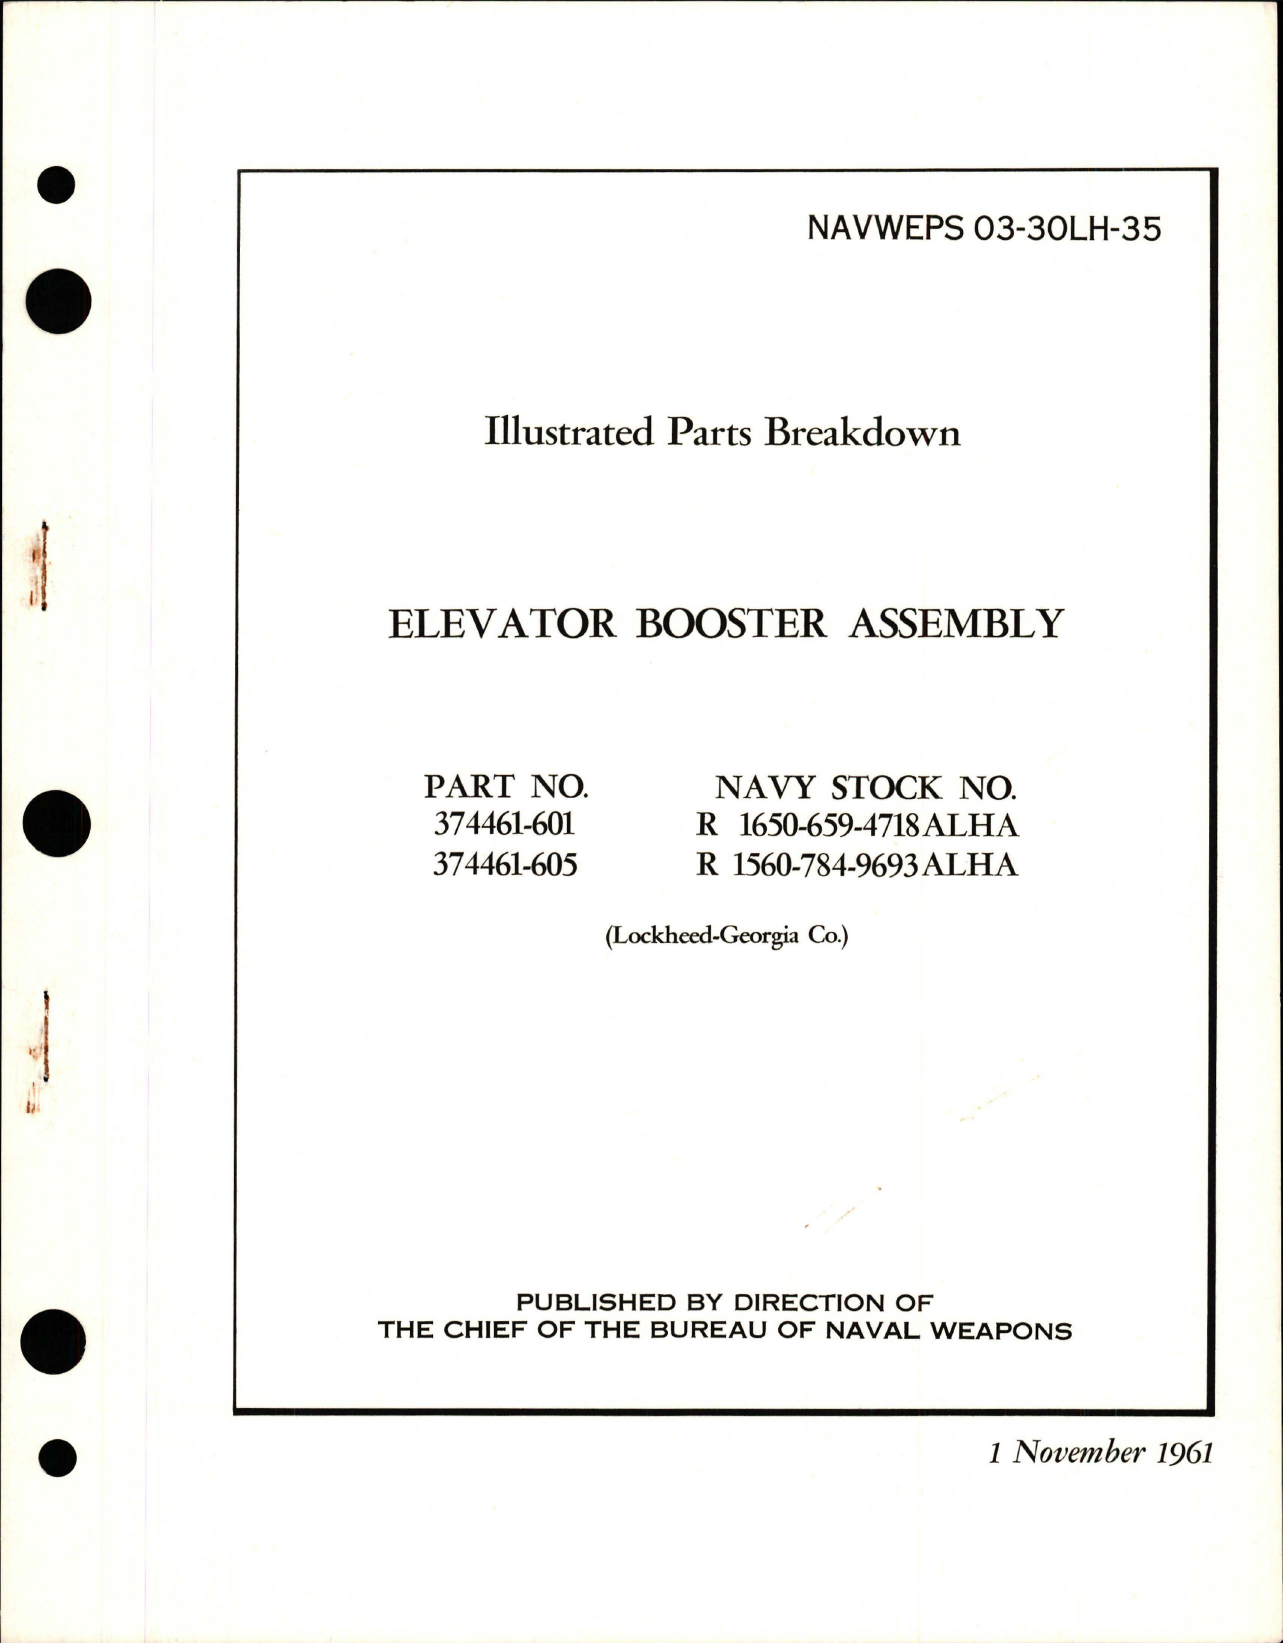 Sample page 1 from AirCorps Library document: Illustrated Parts Breakdown for Elevator Booster Assembly - Parts 374461-601 and 374461-605